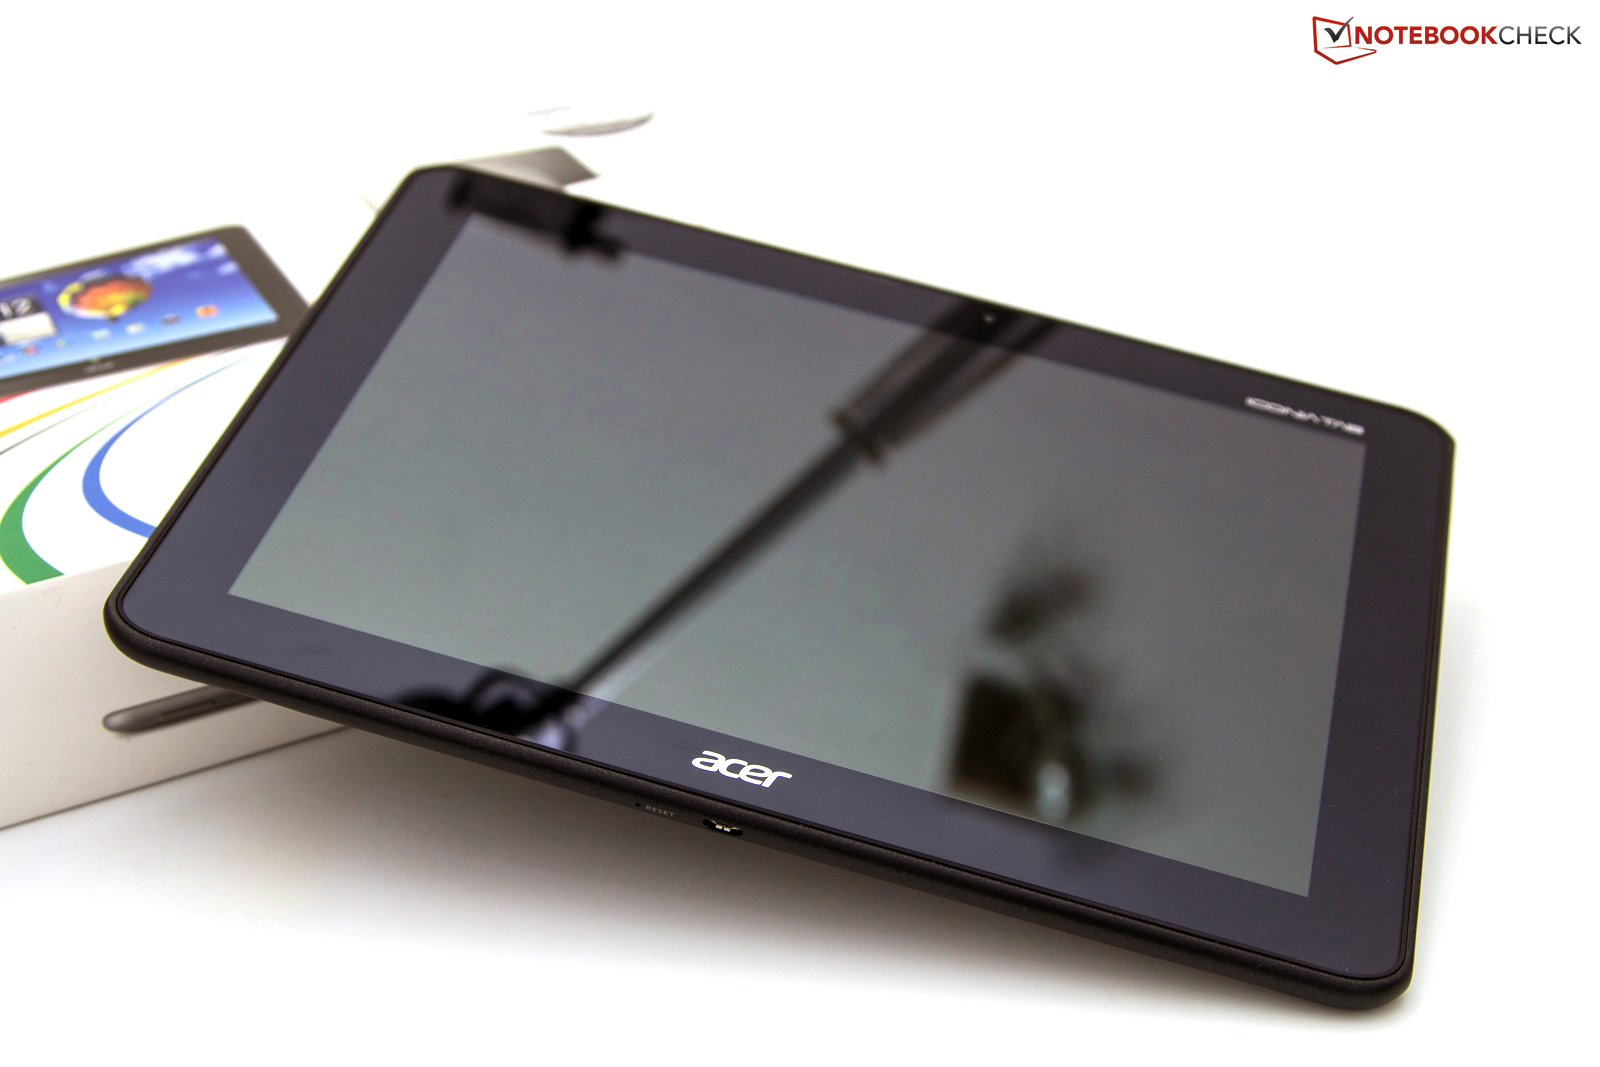 Análisis del tablet Acer Iconia Tab A510 - Notebookcheck.org